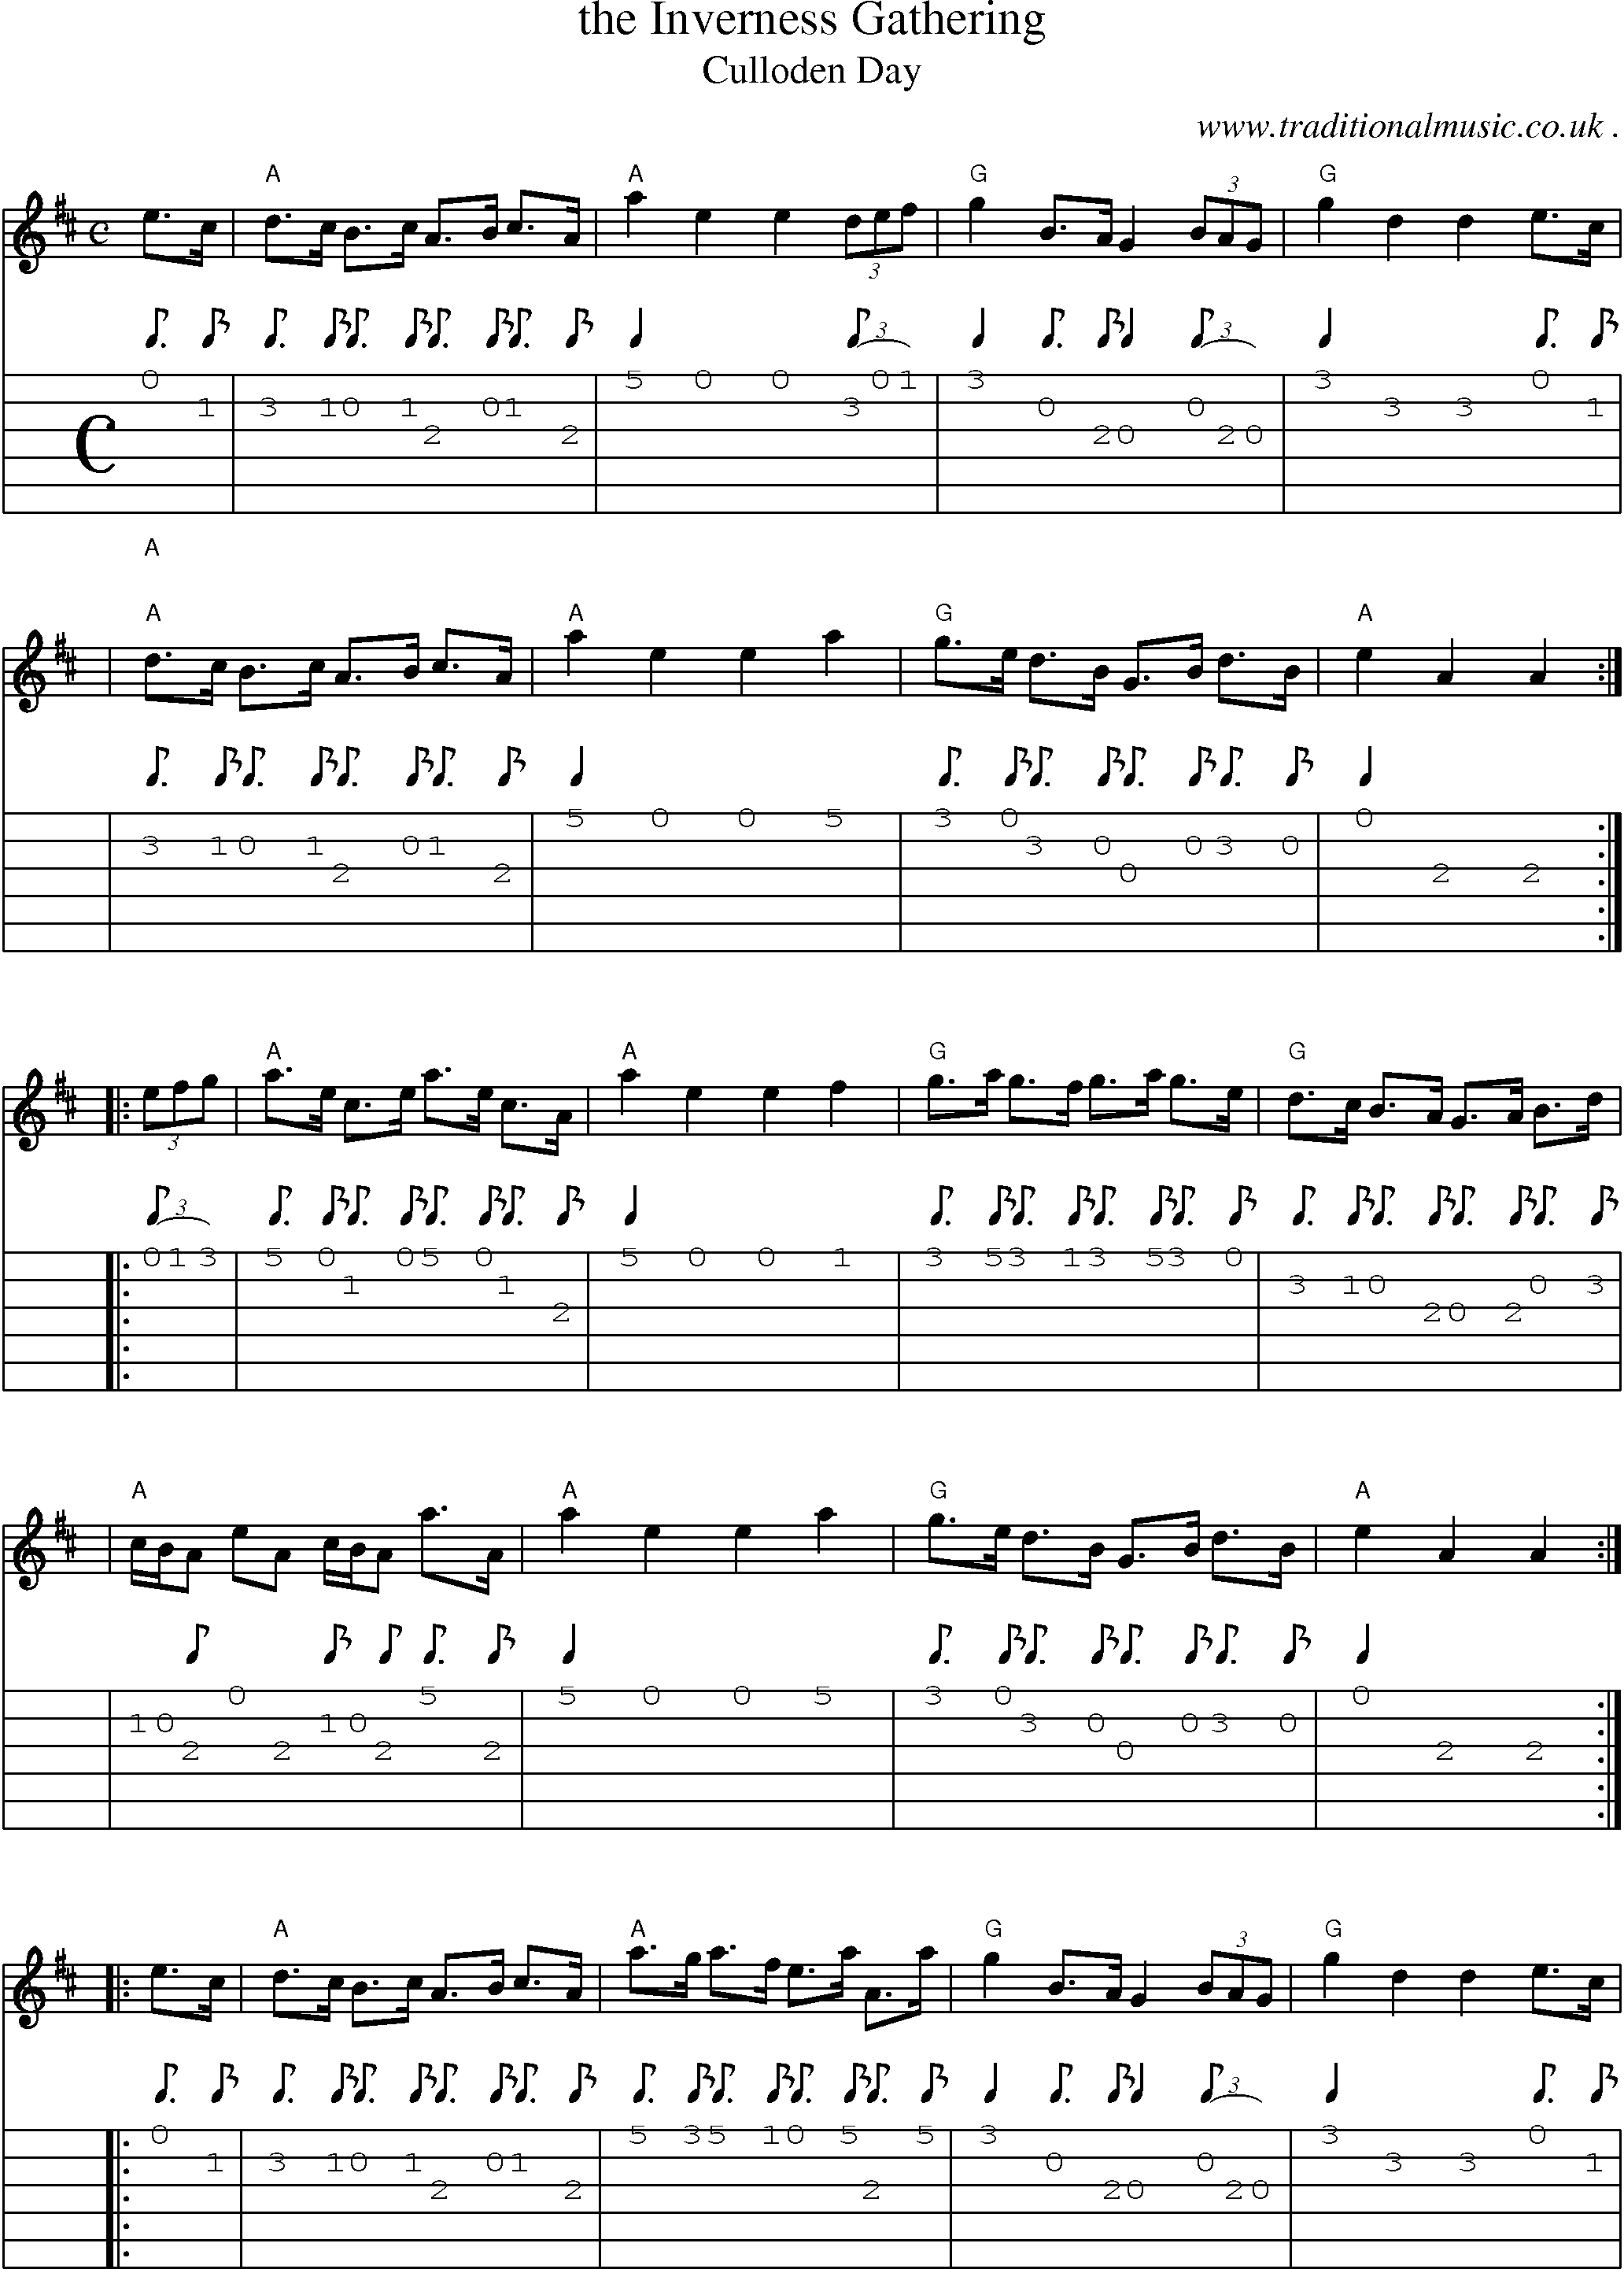 Sheet-music  score, Chords and Guitar Tabs for The Inverness Gathering